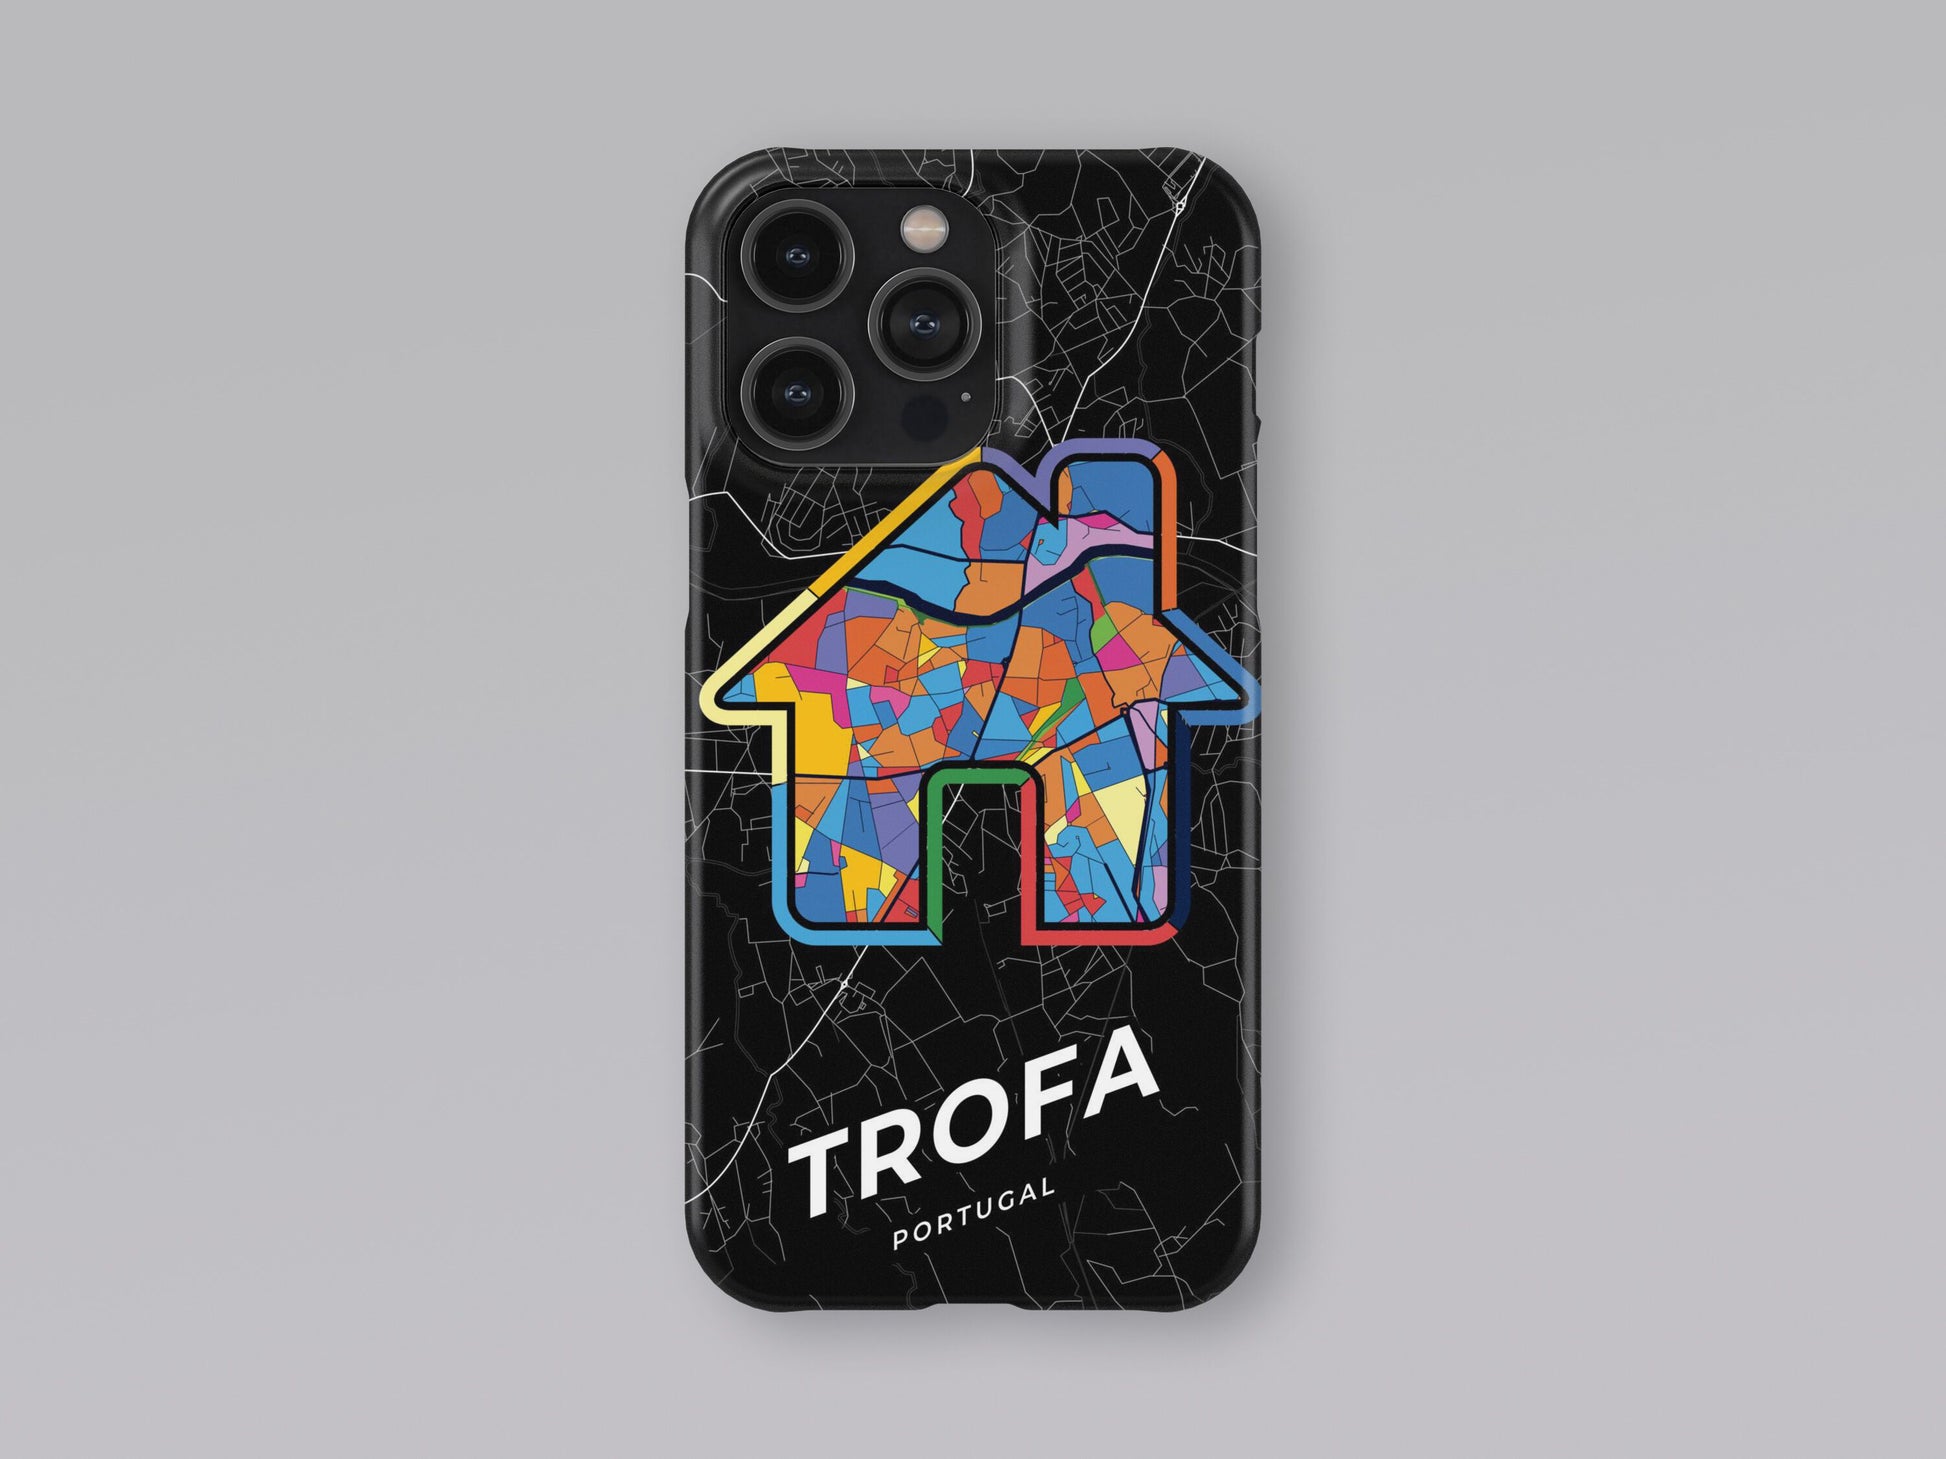 Trofa Portugal slim phone case with colorful icon 3